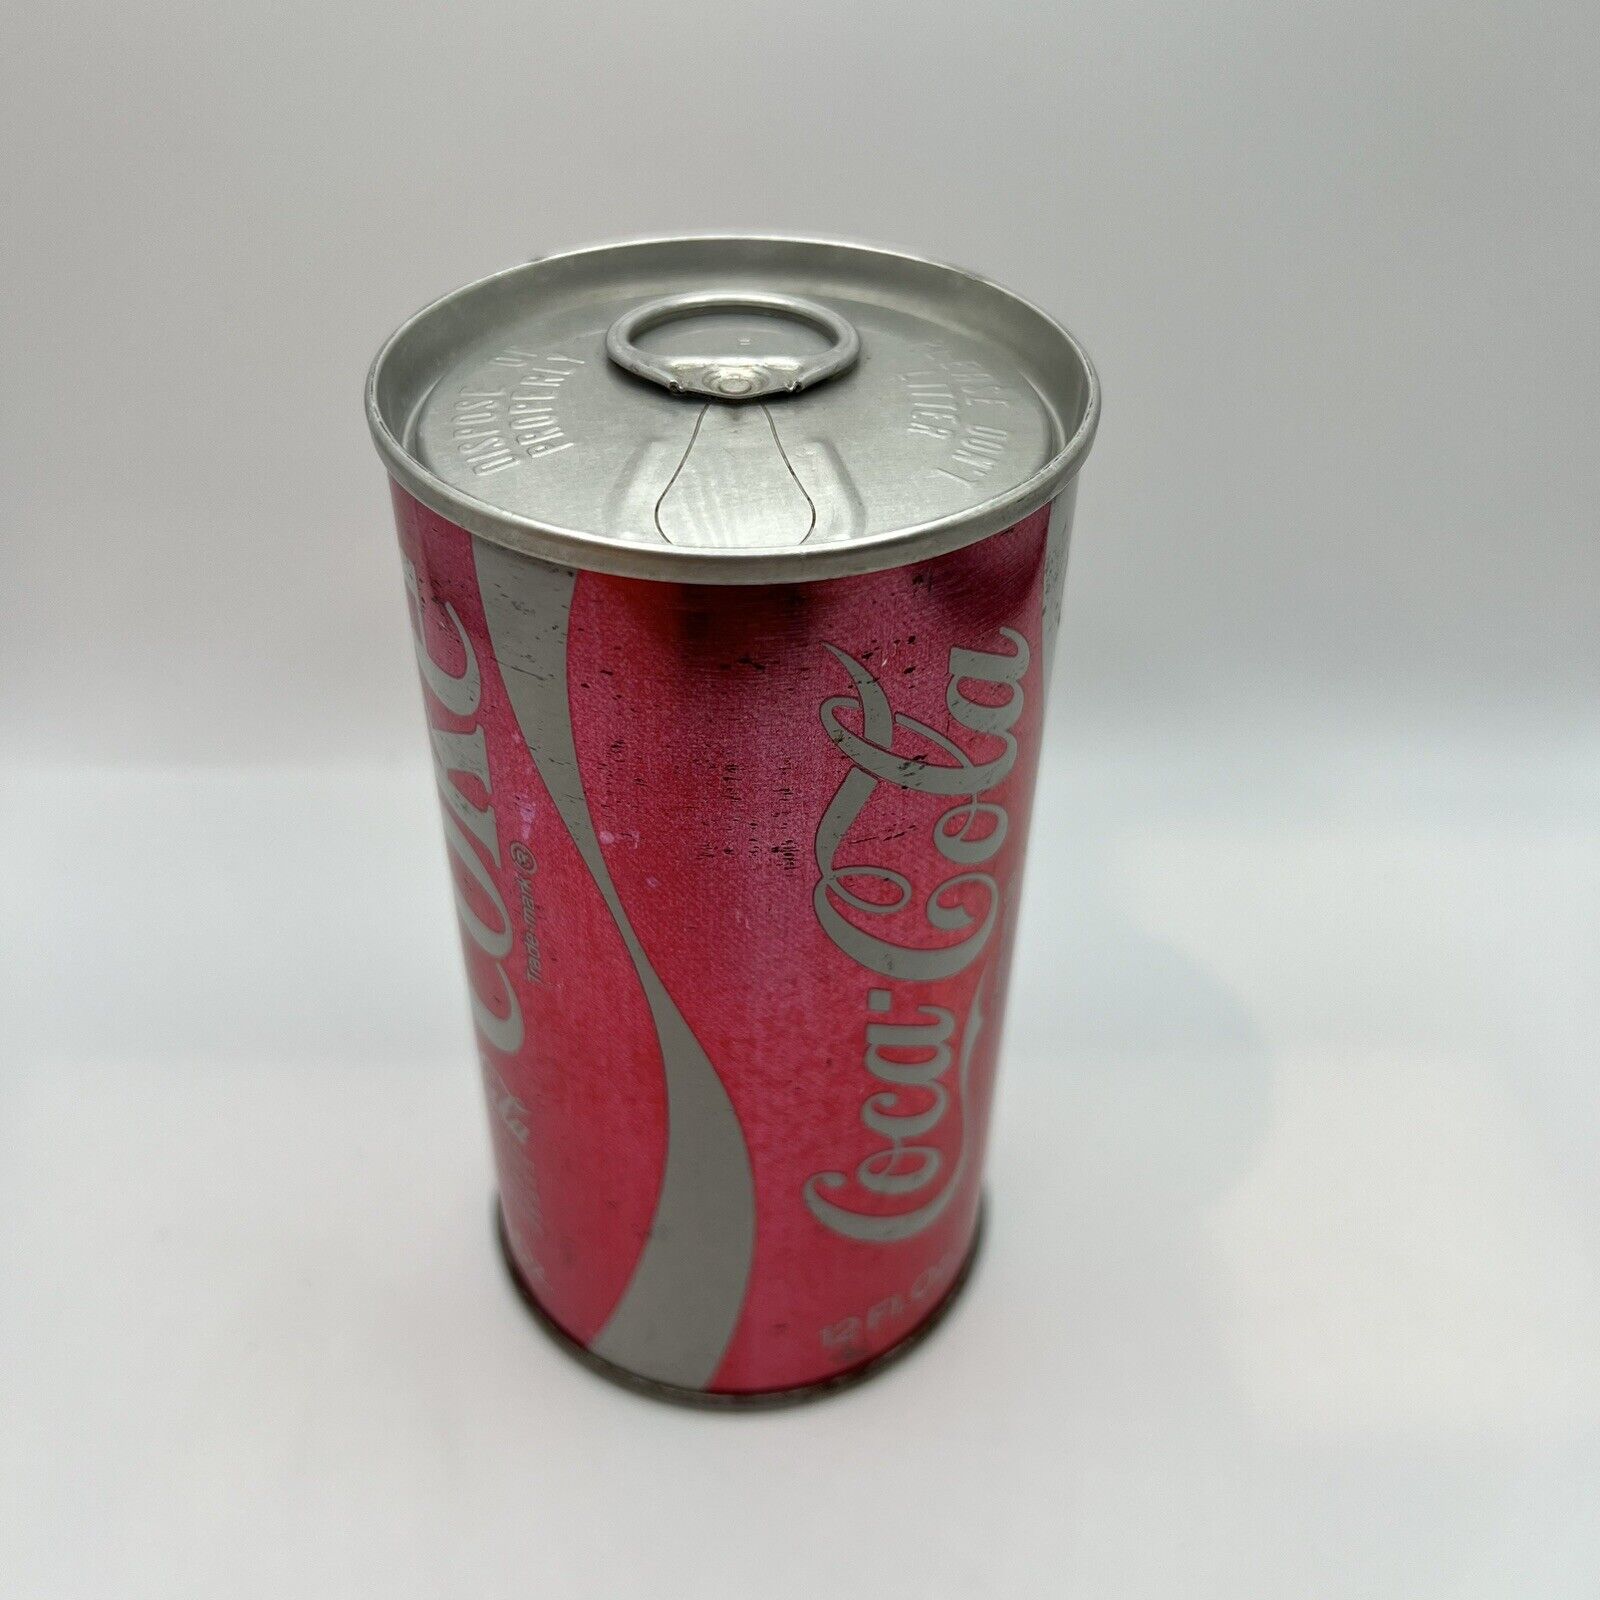 OLD Vintage 1970S UNOPENED Sealed EMPTY COKE CAN Collectible Ft. Worth, TX RARE